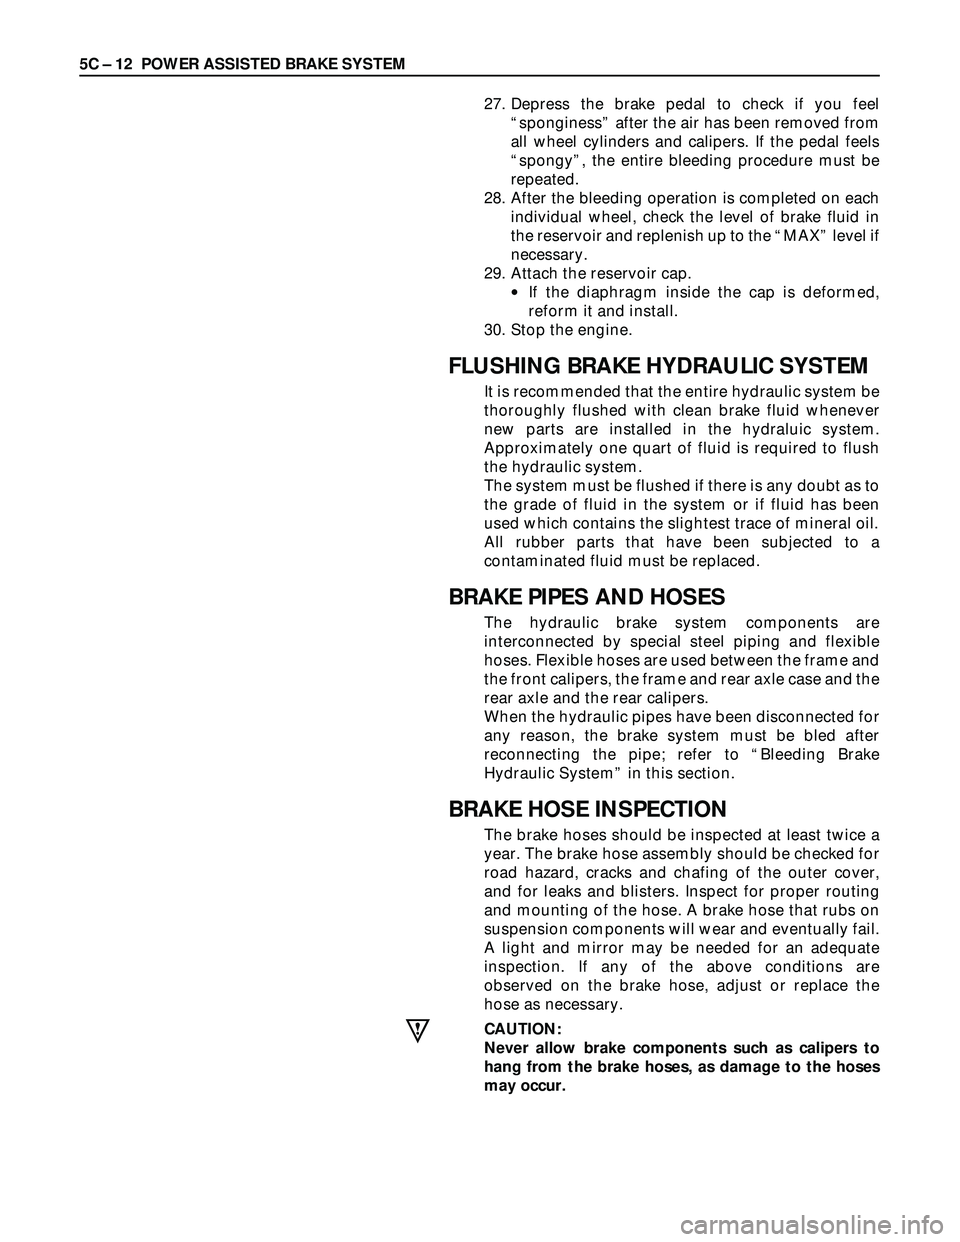 ISUZU TROOPER 1998  Service Repair Manual 5C – 12 POWER ASSISTED BRAKE SYSTEM
27. Depress the brake pedal to check if you feel
“sponginess” after the air has been removed from
all wheel cylinders and calipers. If the pedal feels
“spon